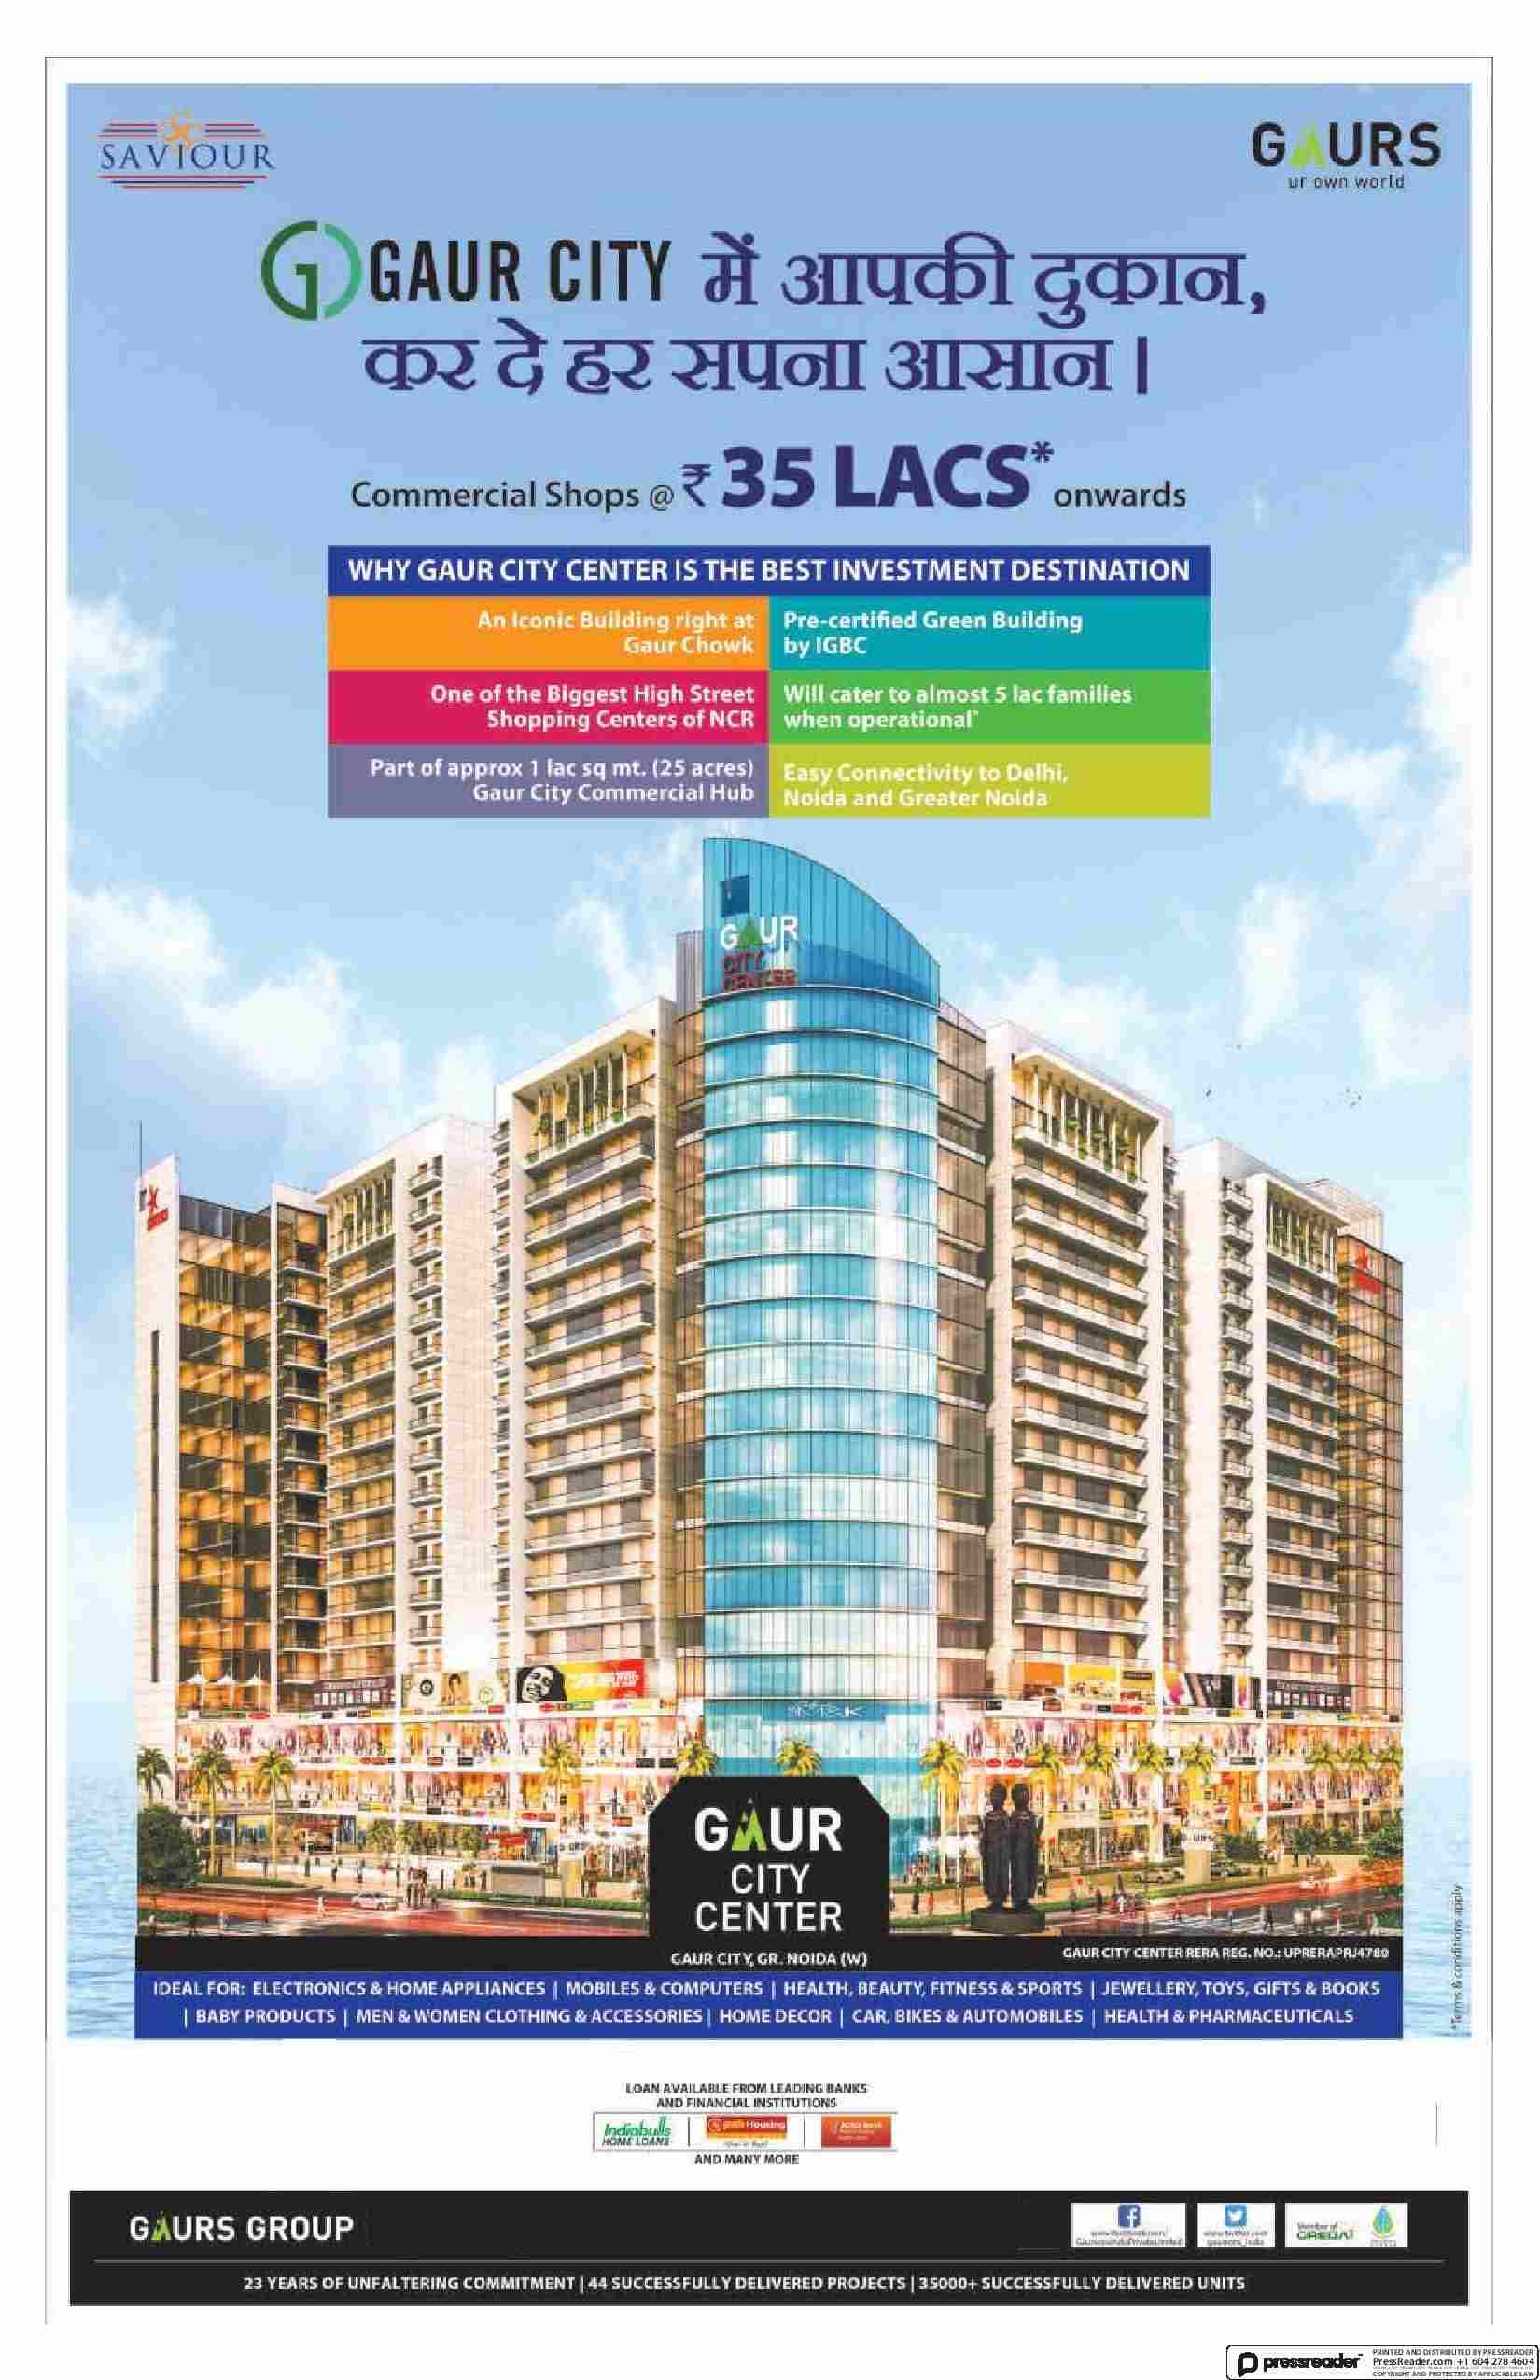 Book commercial shops @ Rs. 35 Lacs onwards at Gaur City Center in Greater Noida Update